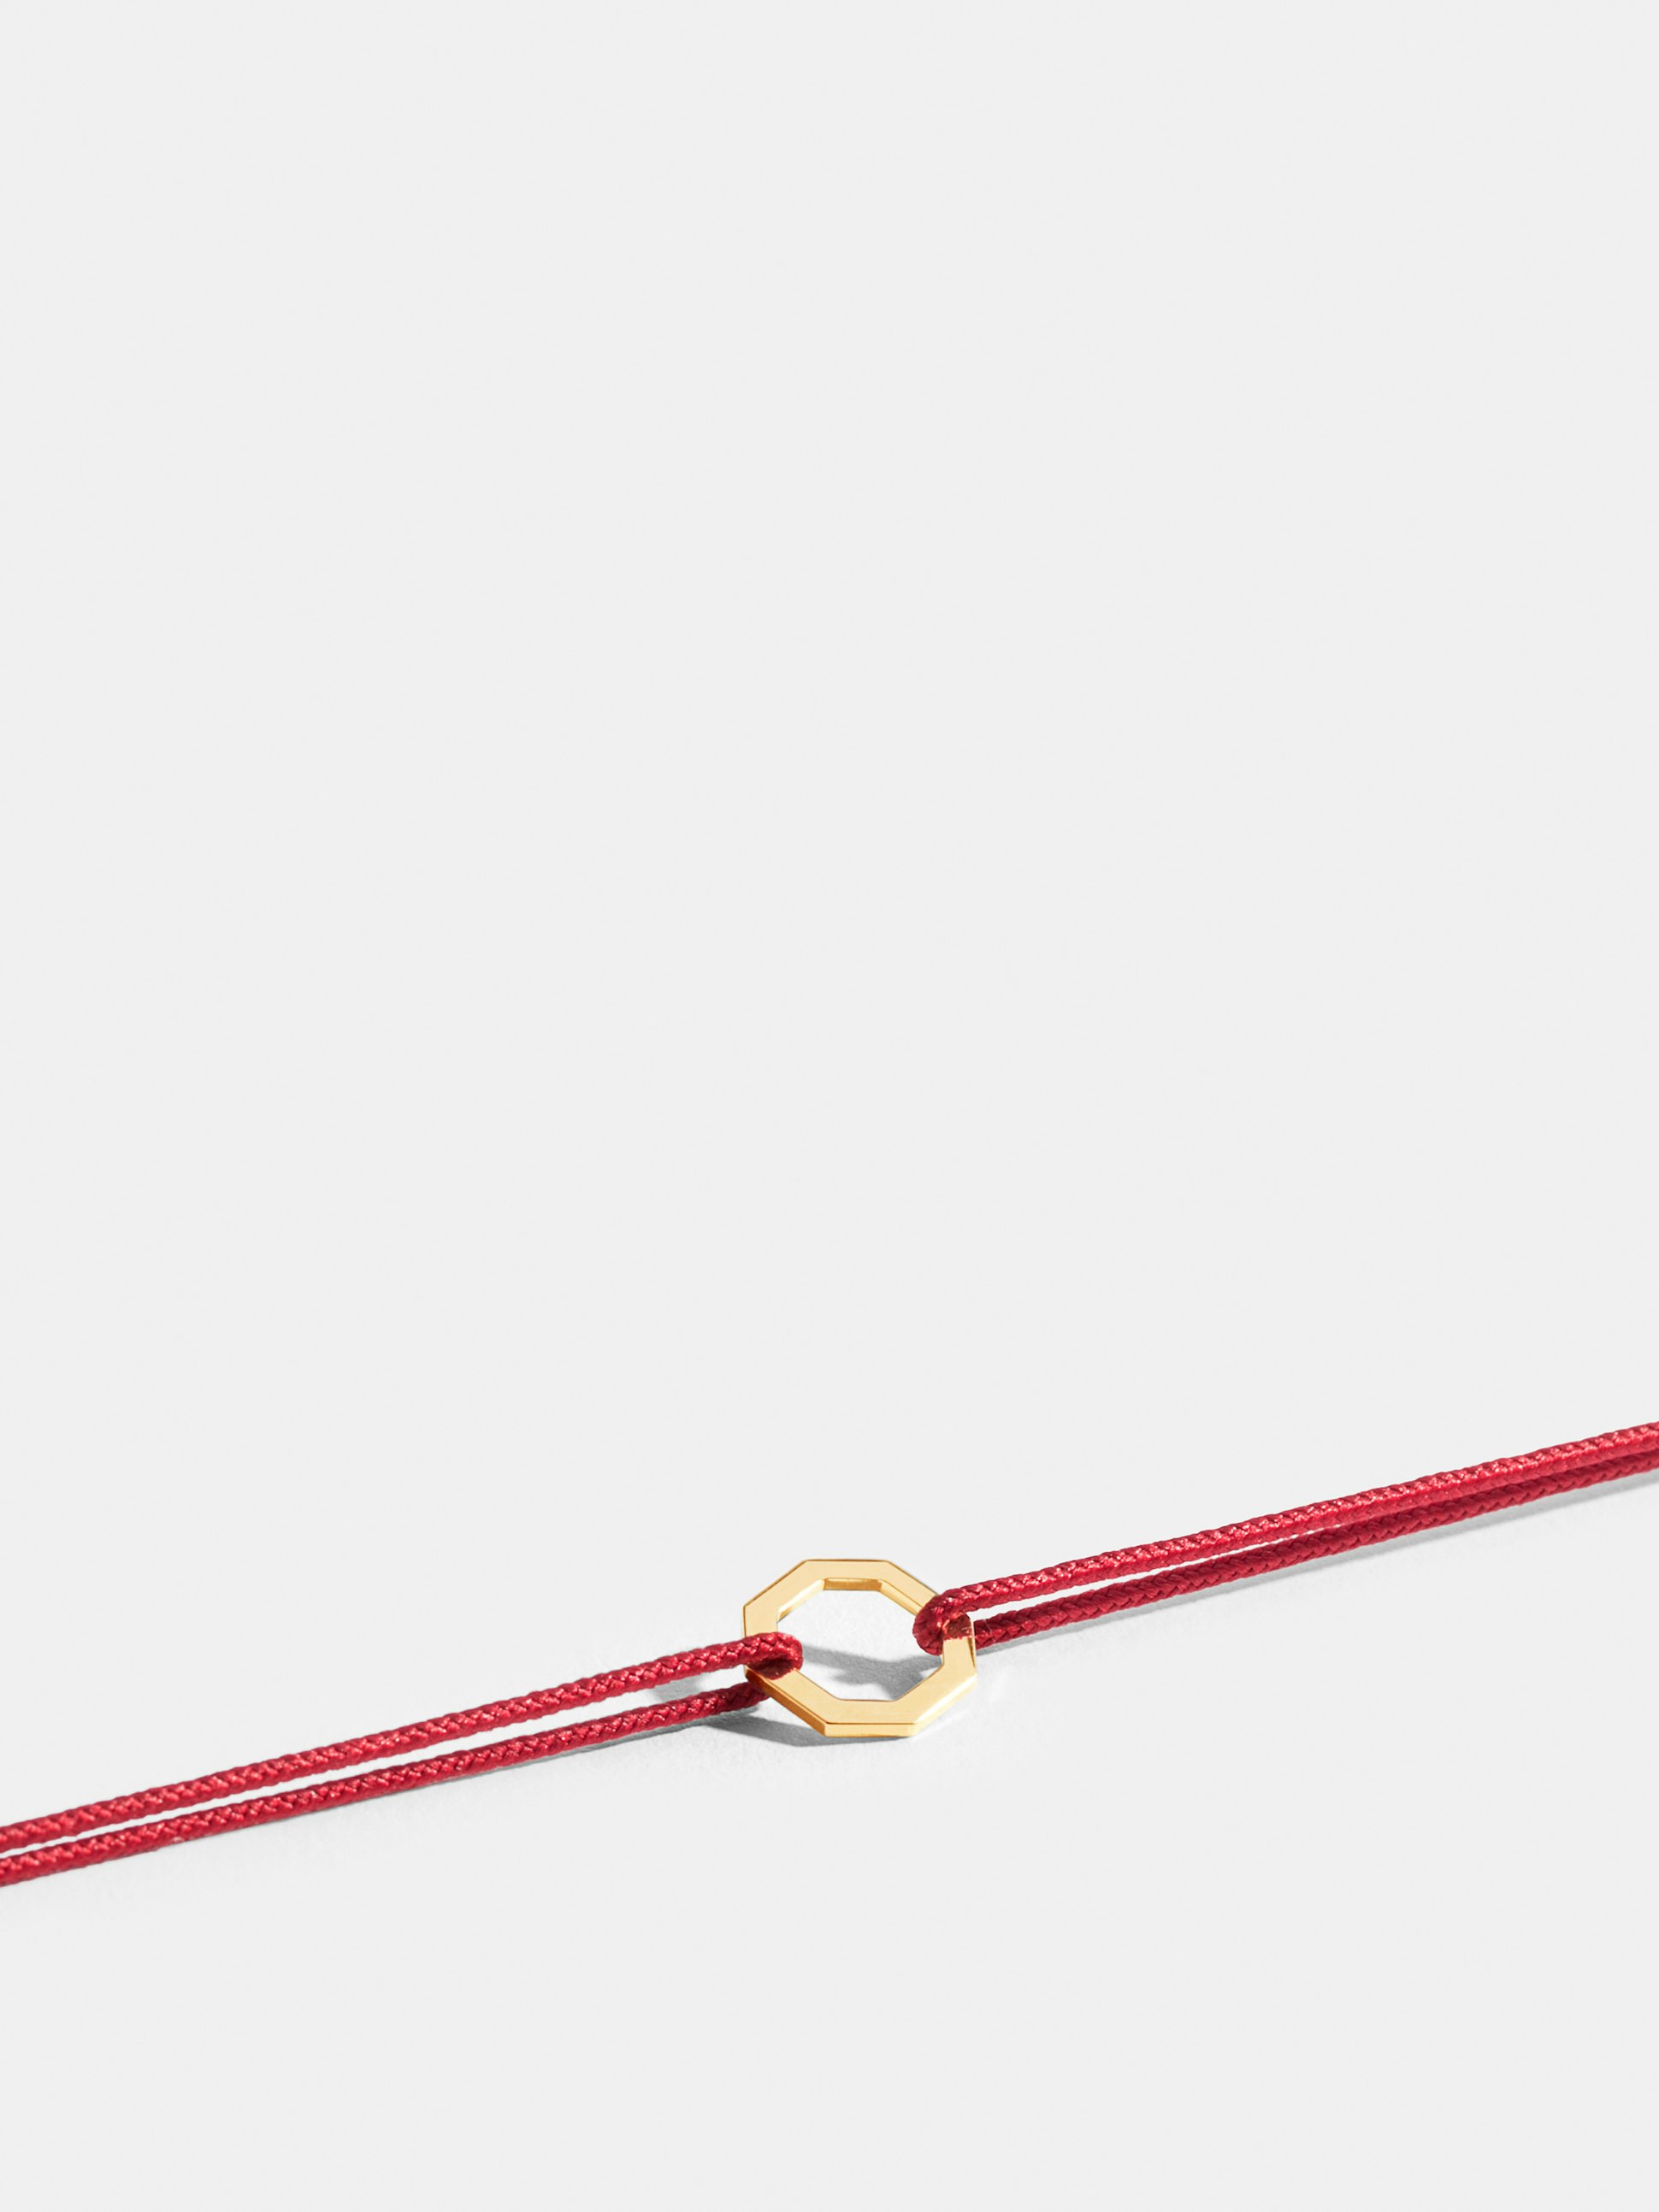 Octogone motif in 18k Fairmined ethical yellow gold, on a poppy red cord. 